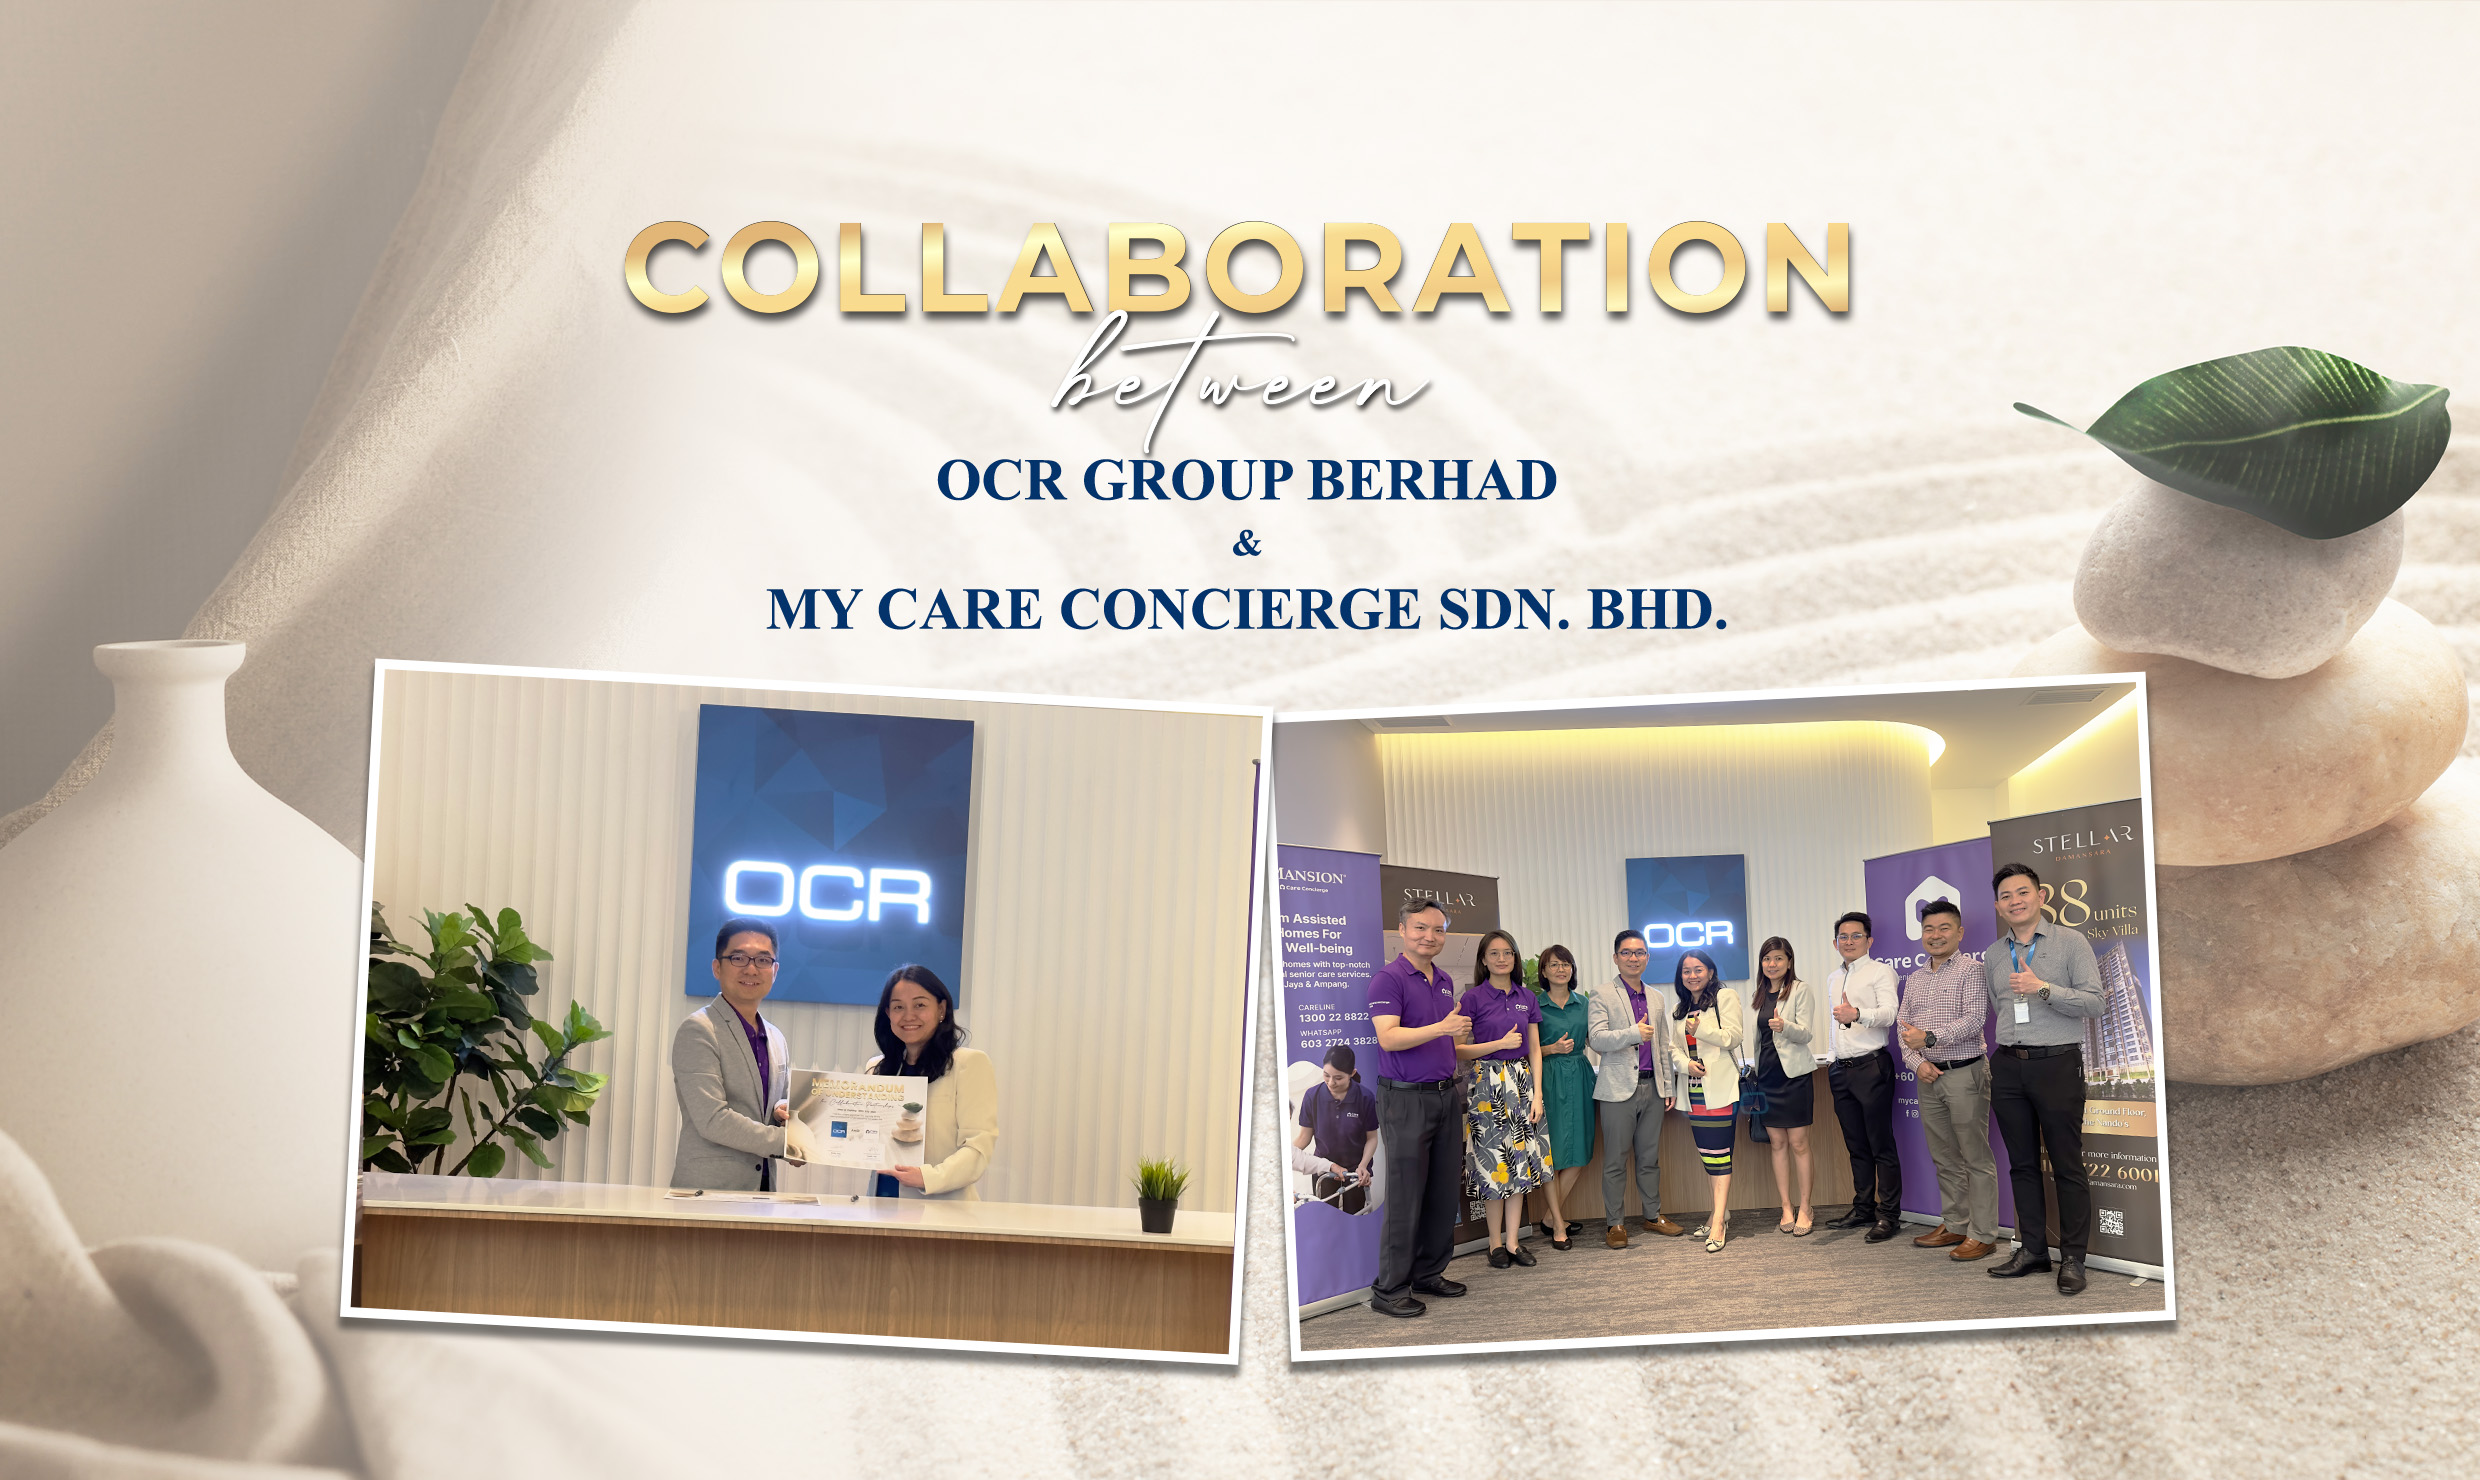 OCR Collaborate with Care Concierge